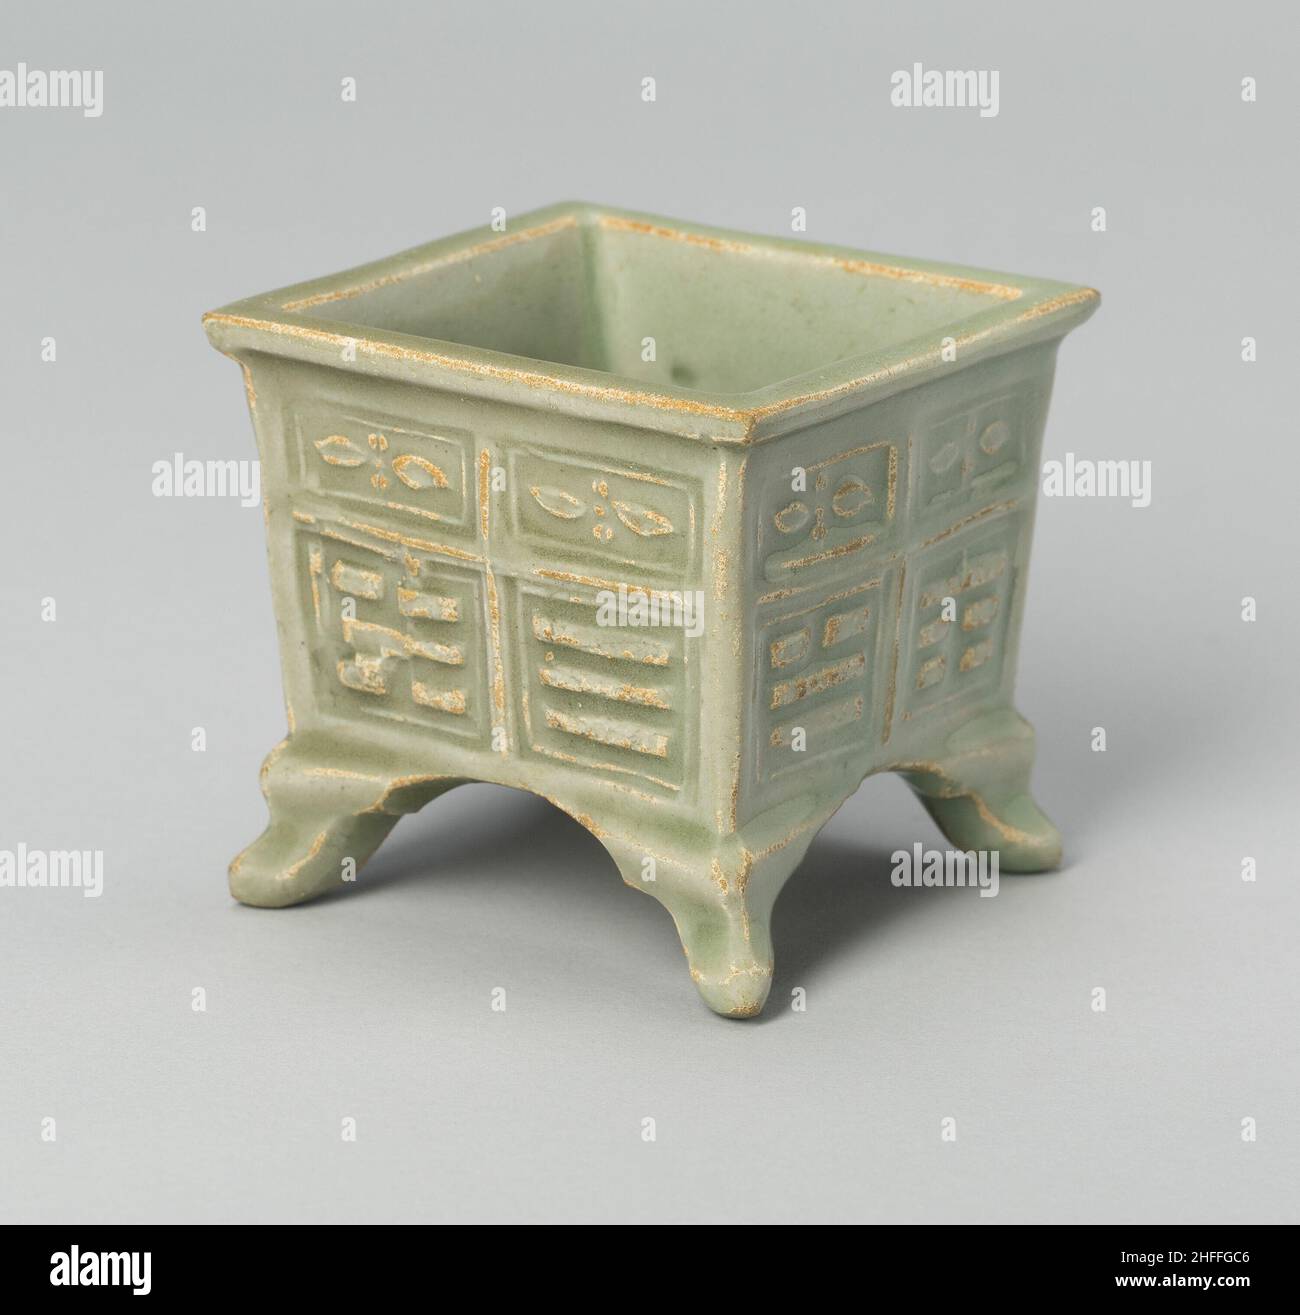 Square Jar with Archaistic &quot;Trigrams&quot; and Floral Scrolls, Yuan (1271-1368) or Ming dynasty (1368-1644), c. 14th/16th century. Stock Photo